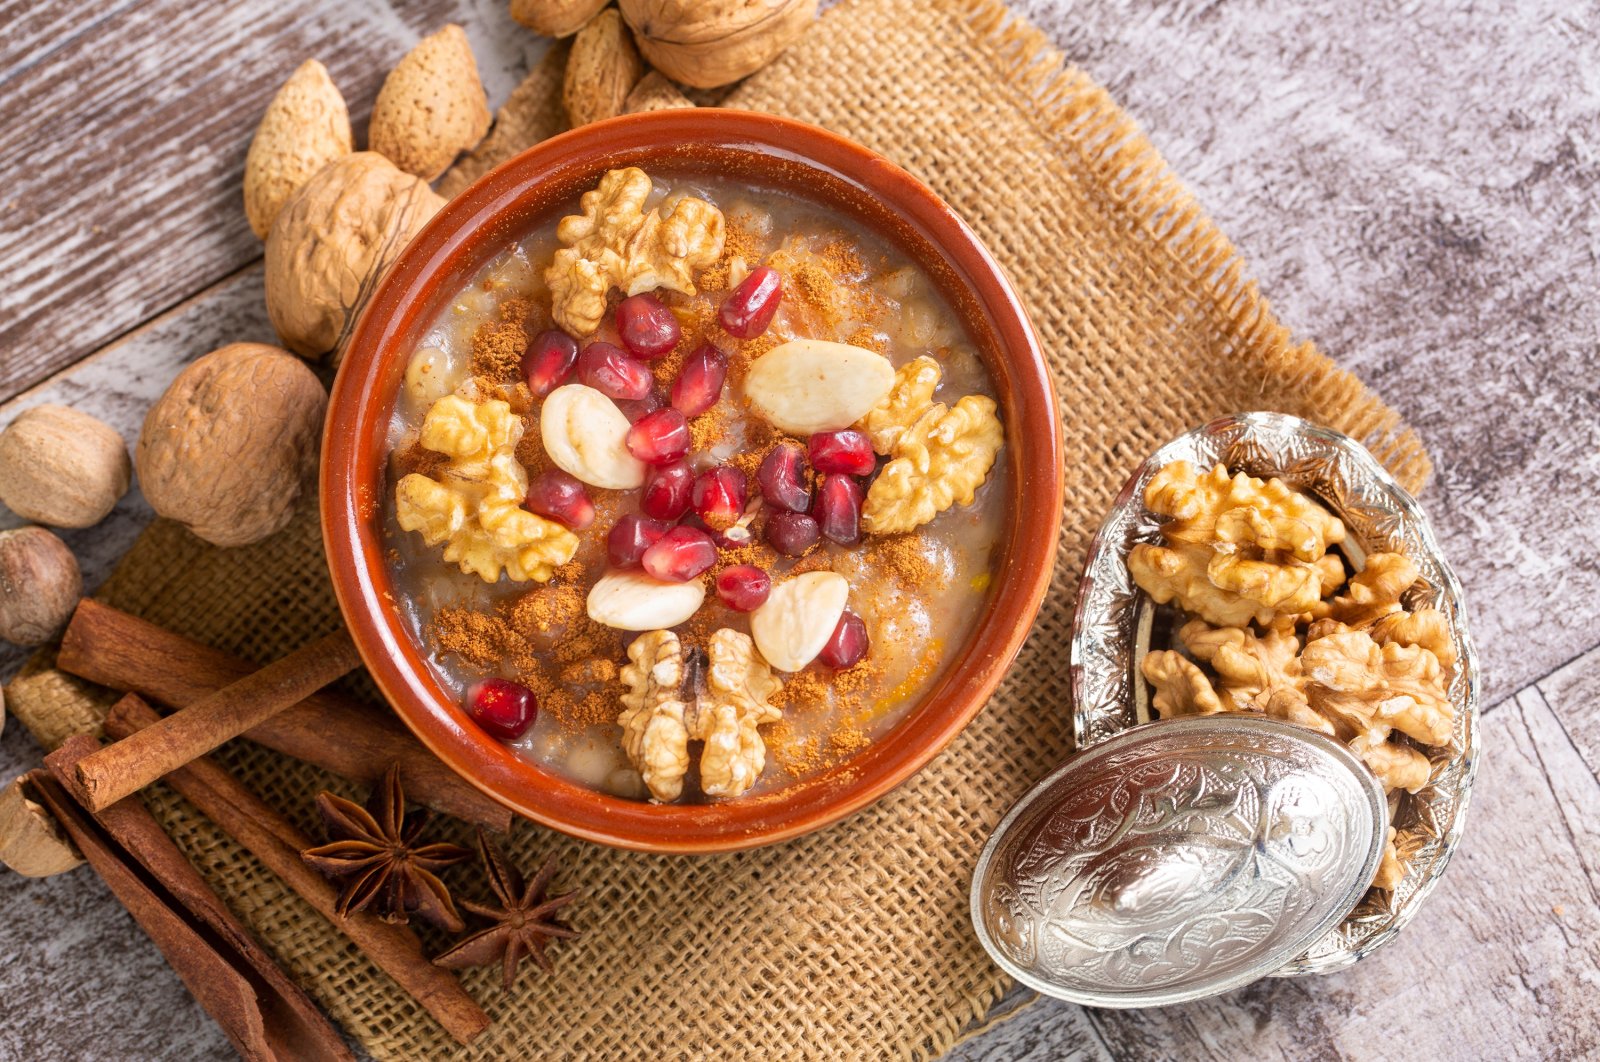 Ashura is made of coarsely ground wheat, chickpeas, beans, rice, apricots, grapes, berries and other fruits. (Shutterstock Photo)